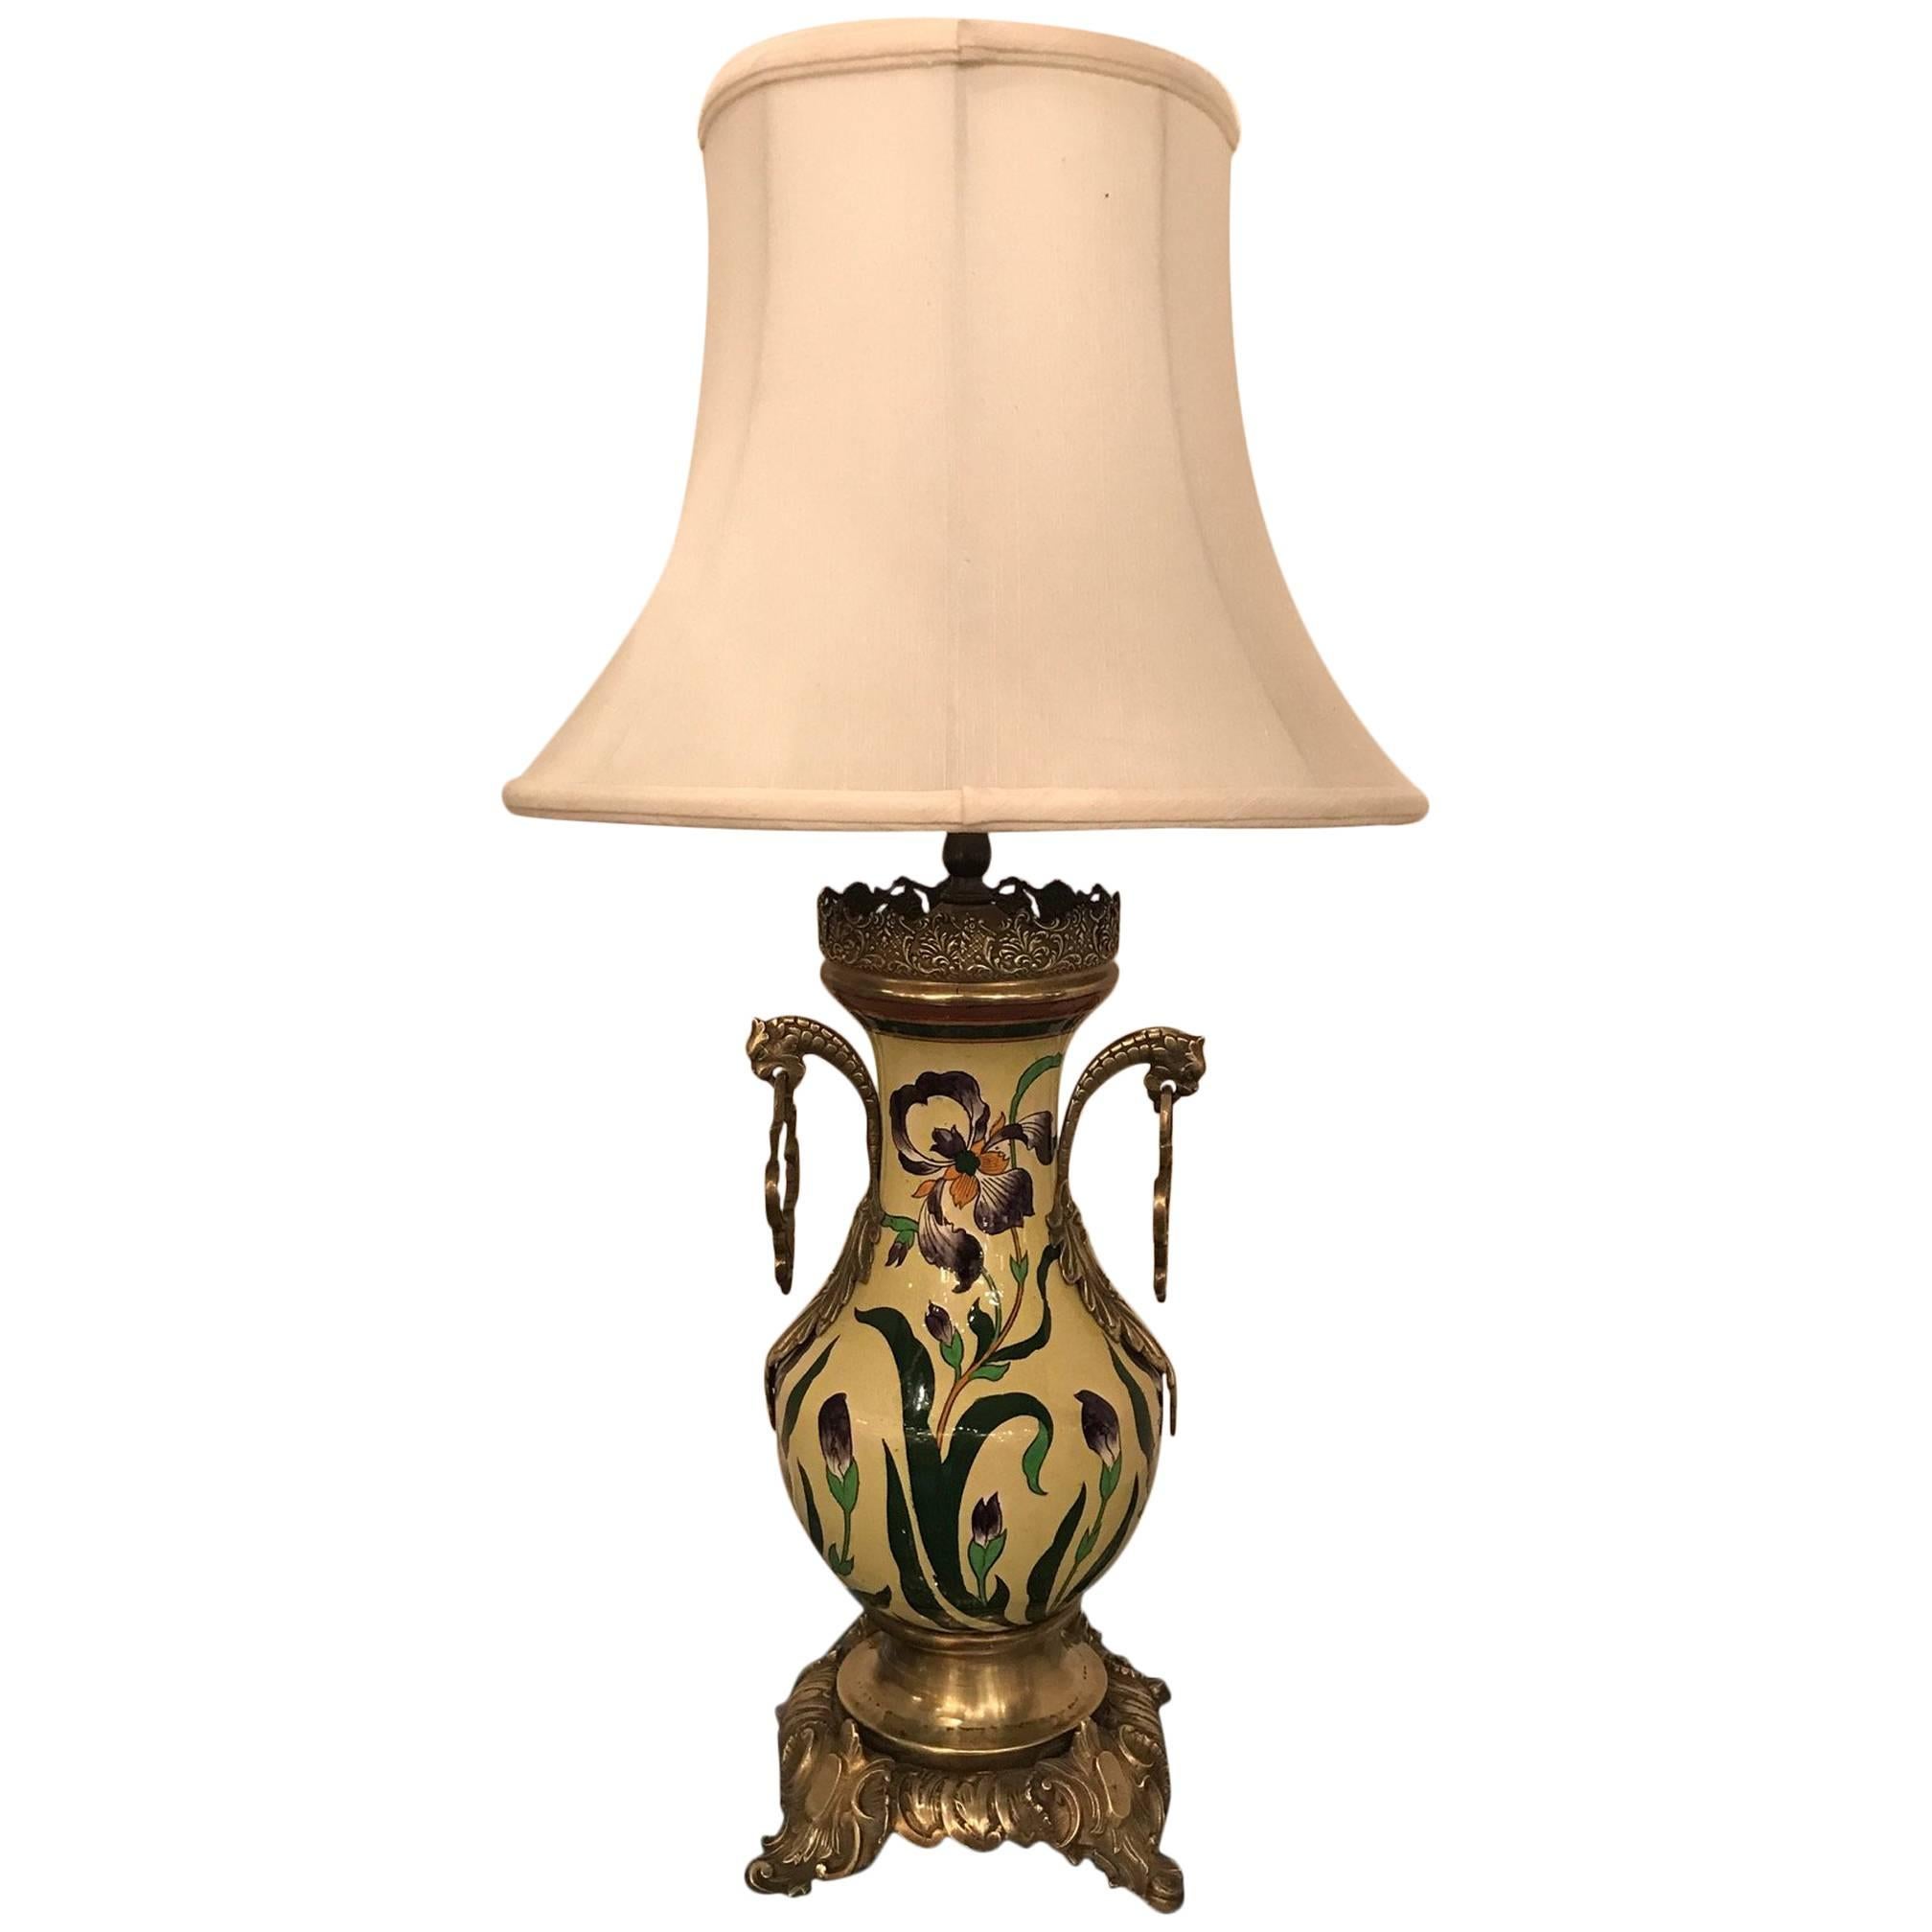 French Hand-Painted Table Lamp